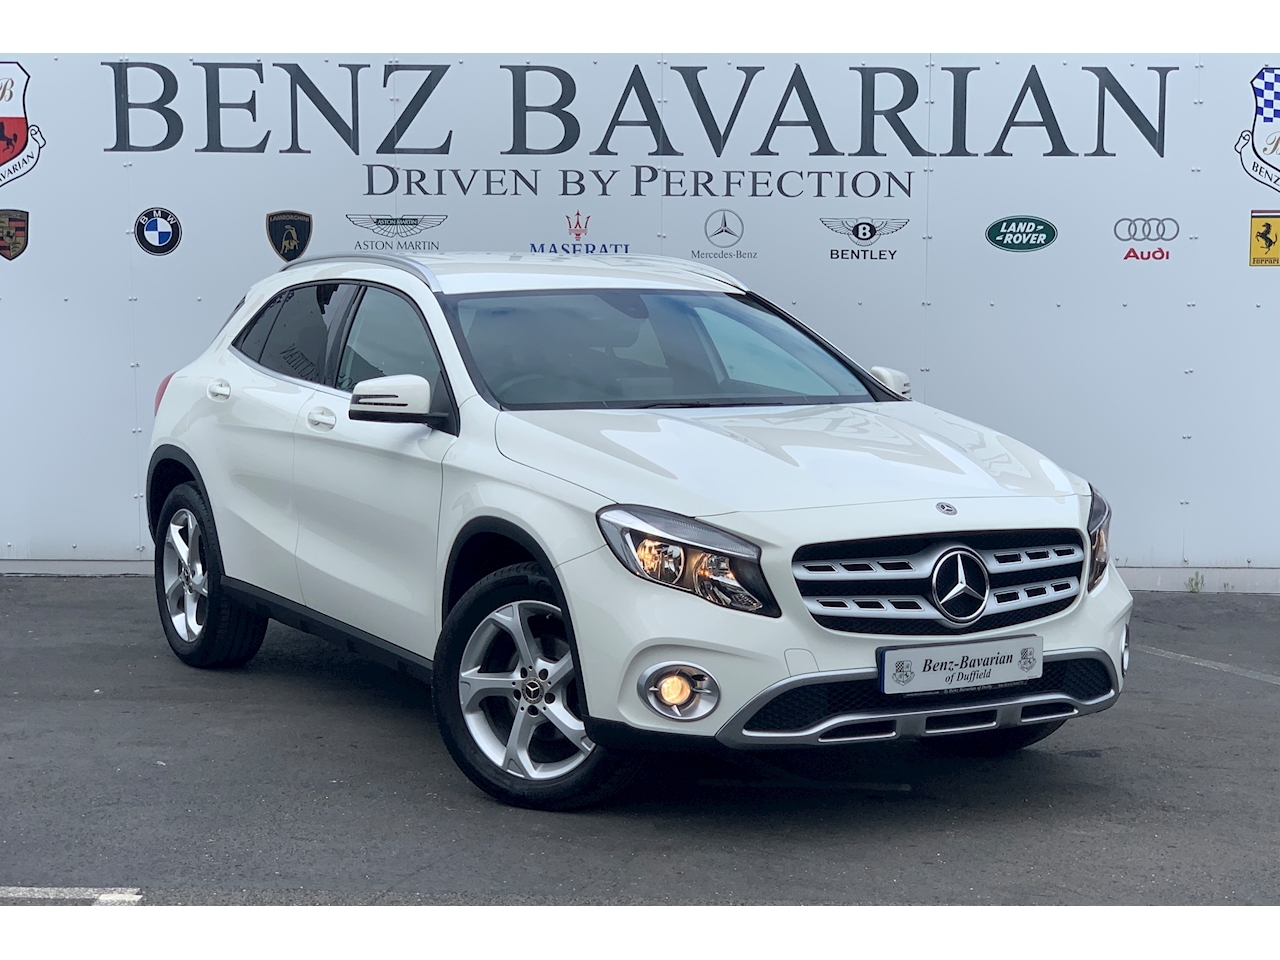 2.1 GLA200d Sport SUV 5dr Diesel 7G-DCT 4MATIC (s/s) (136 ps)